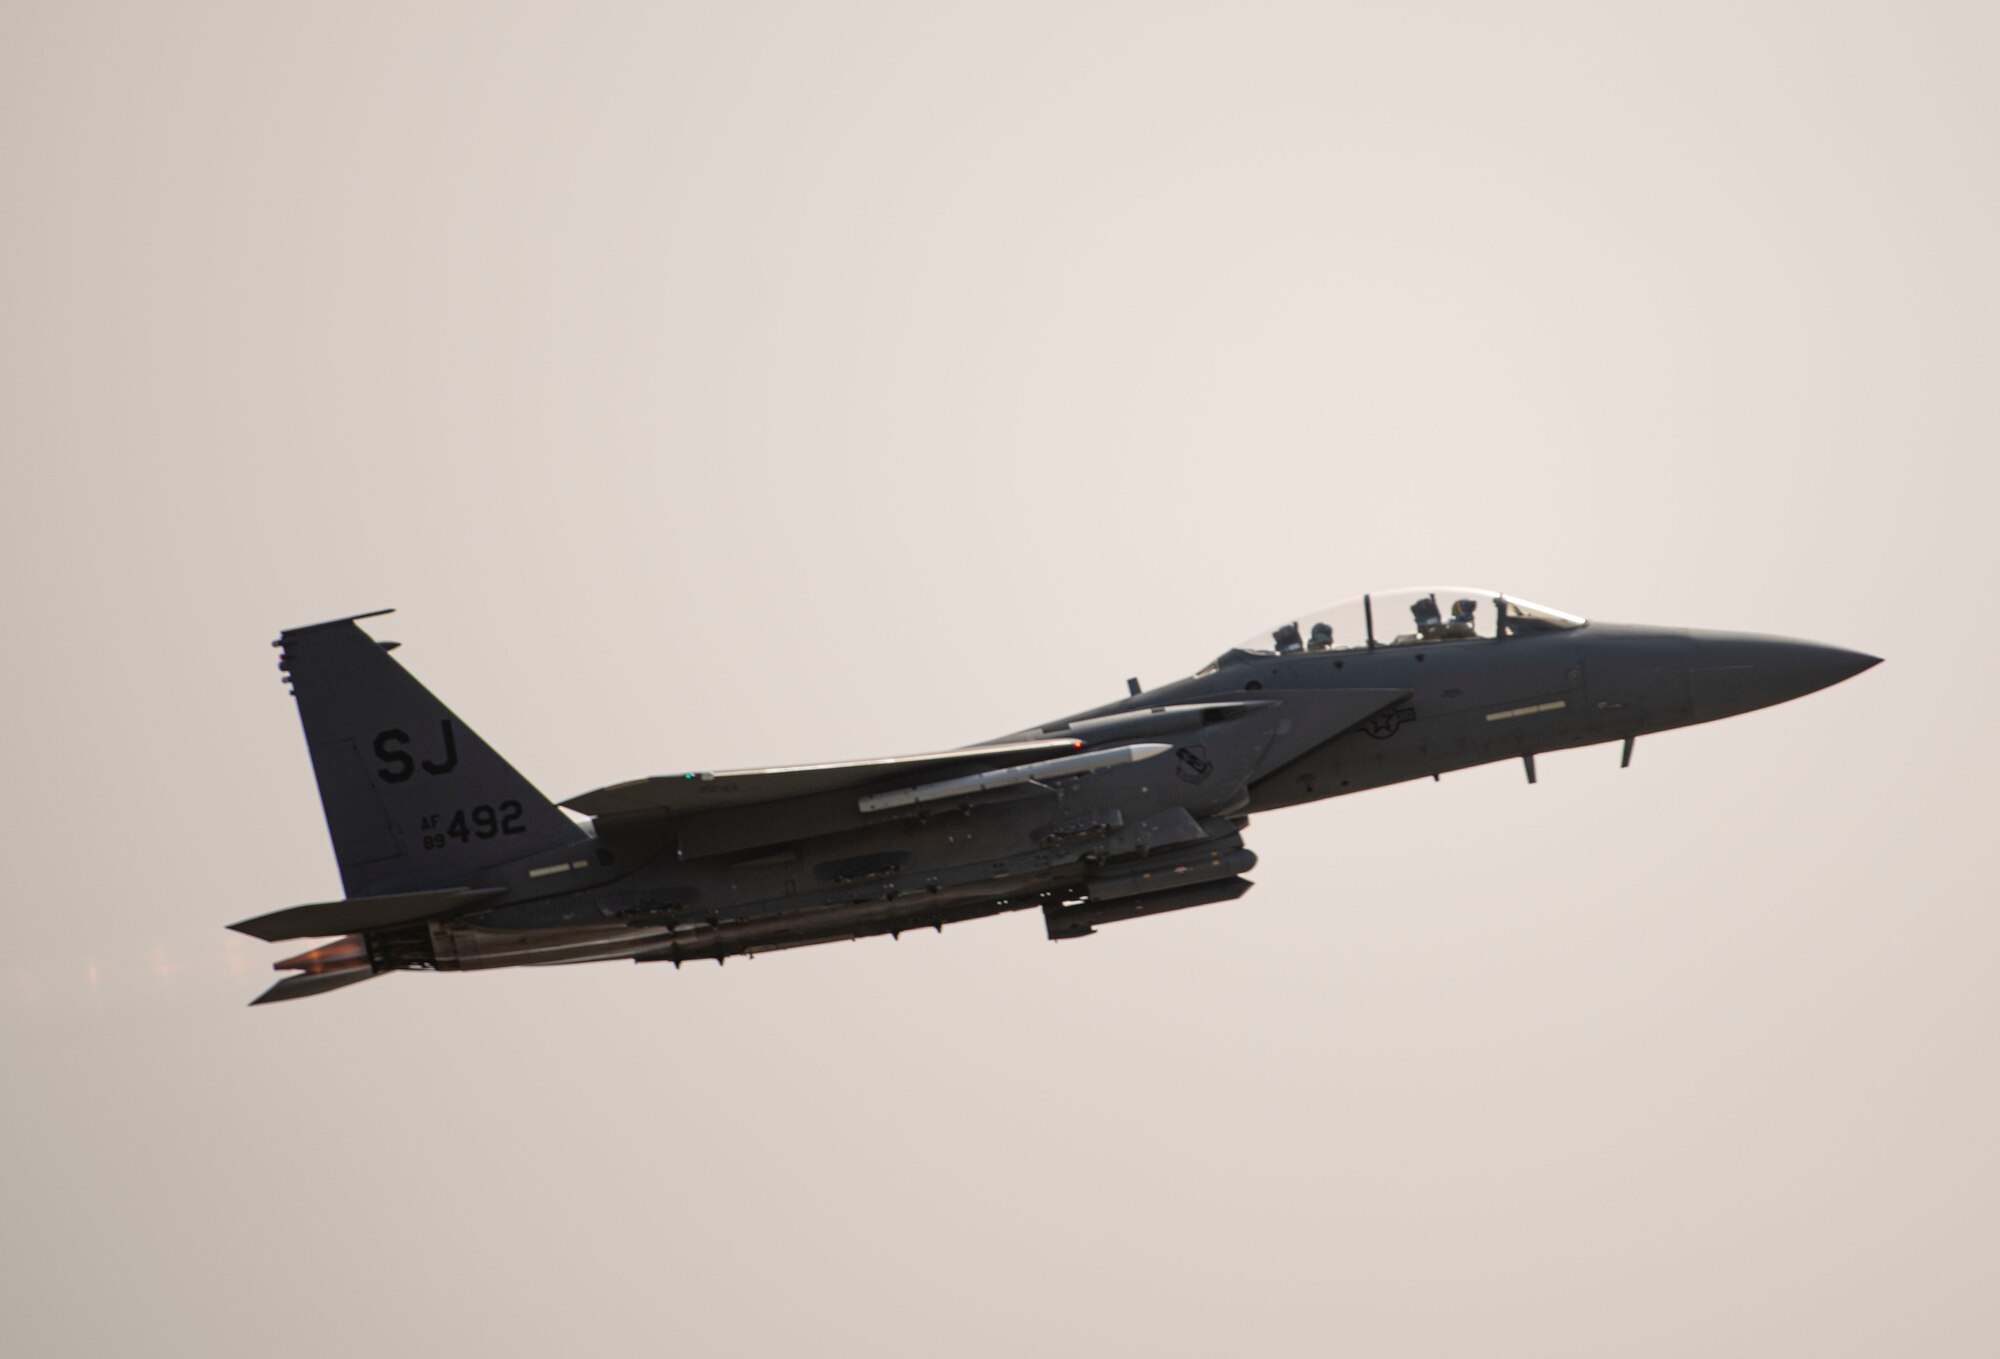 In an effort to expand capabilities, the 414th FG, a subordinate unit to the 944th Fighter Wing at Luke Air Force Base, Arizona, successfully launched four F-15E Strike Eagle training sorties on Saturday of the UTA. The effort involved members of the 414th Maintenance Squadron, 307th Fighter Squadron, and the 4th Fighter Wing’s 336th Fighter Squadron.